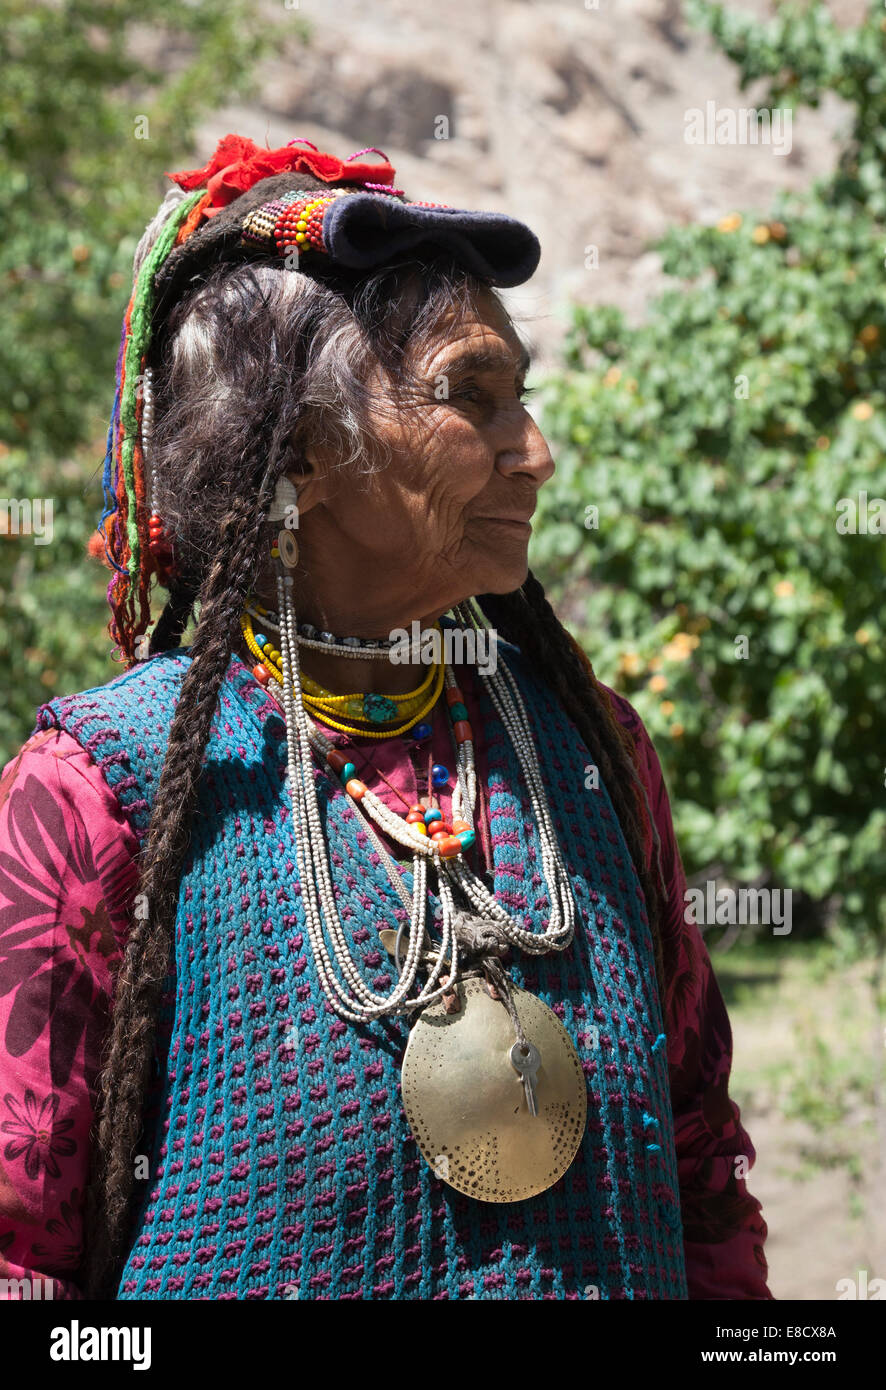 Woman villager from Dha Hanu village the site of Dard or Brokpa tribe, Indus valley Ladakh, India Stock Photo